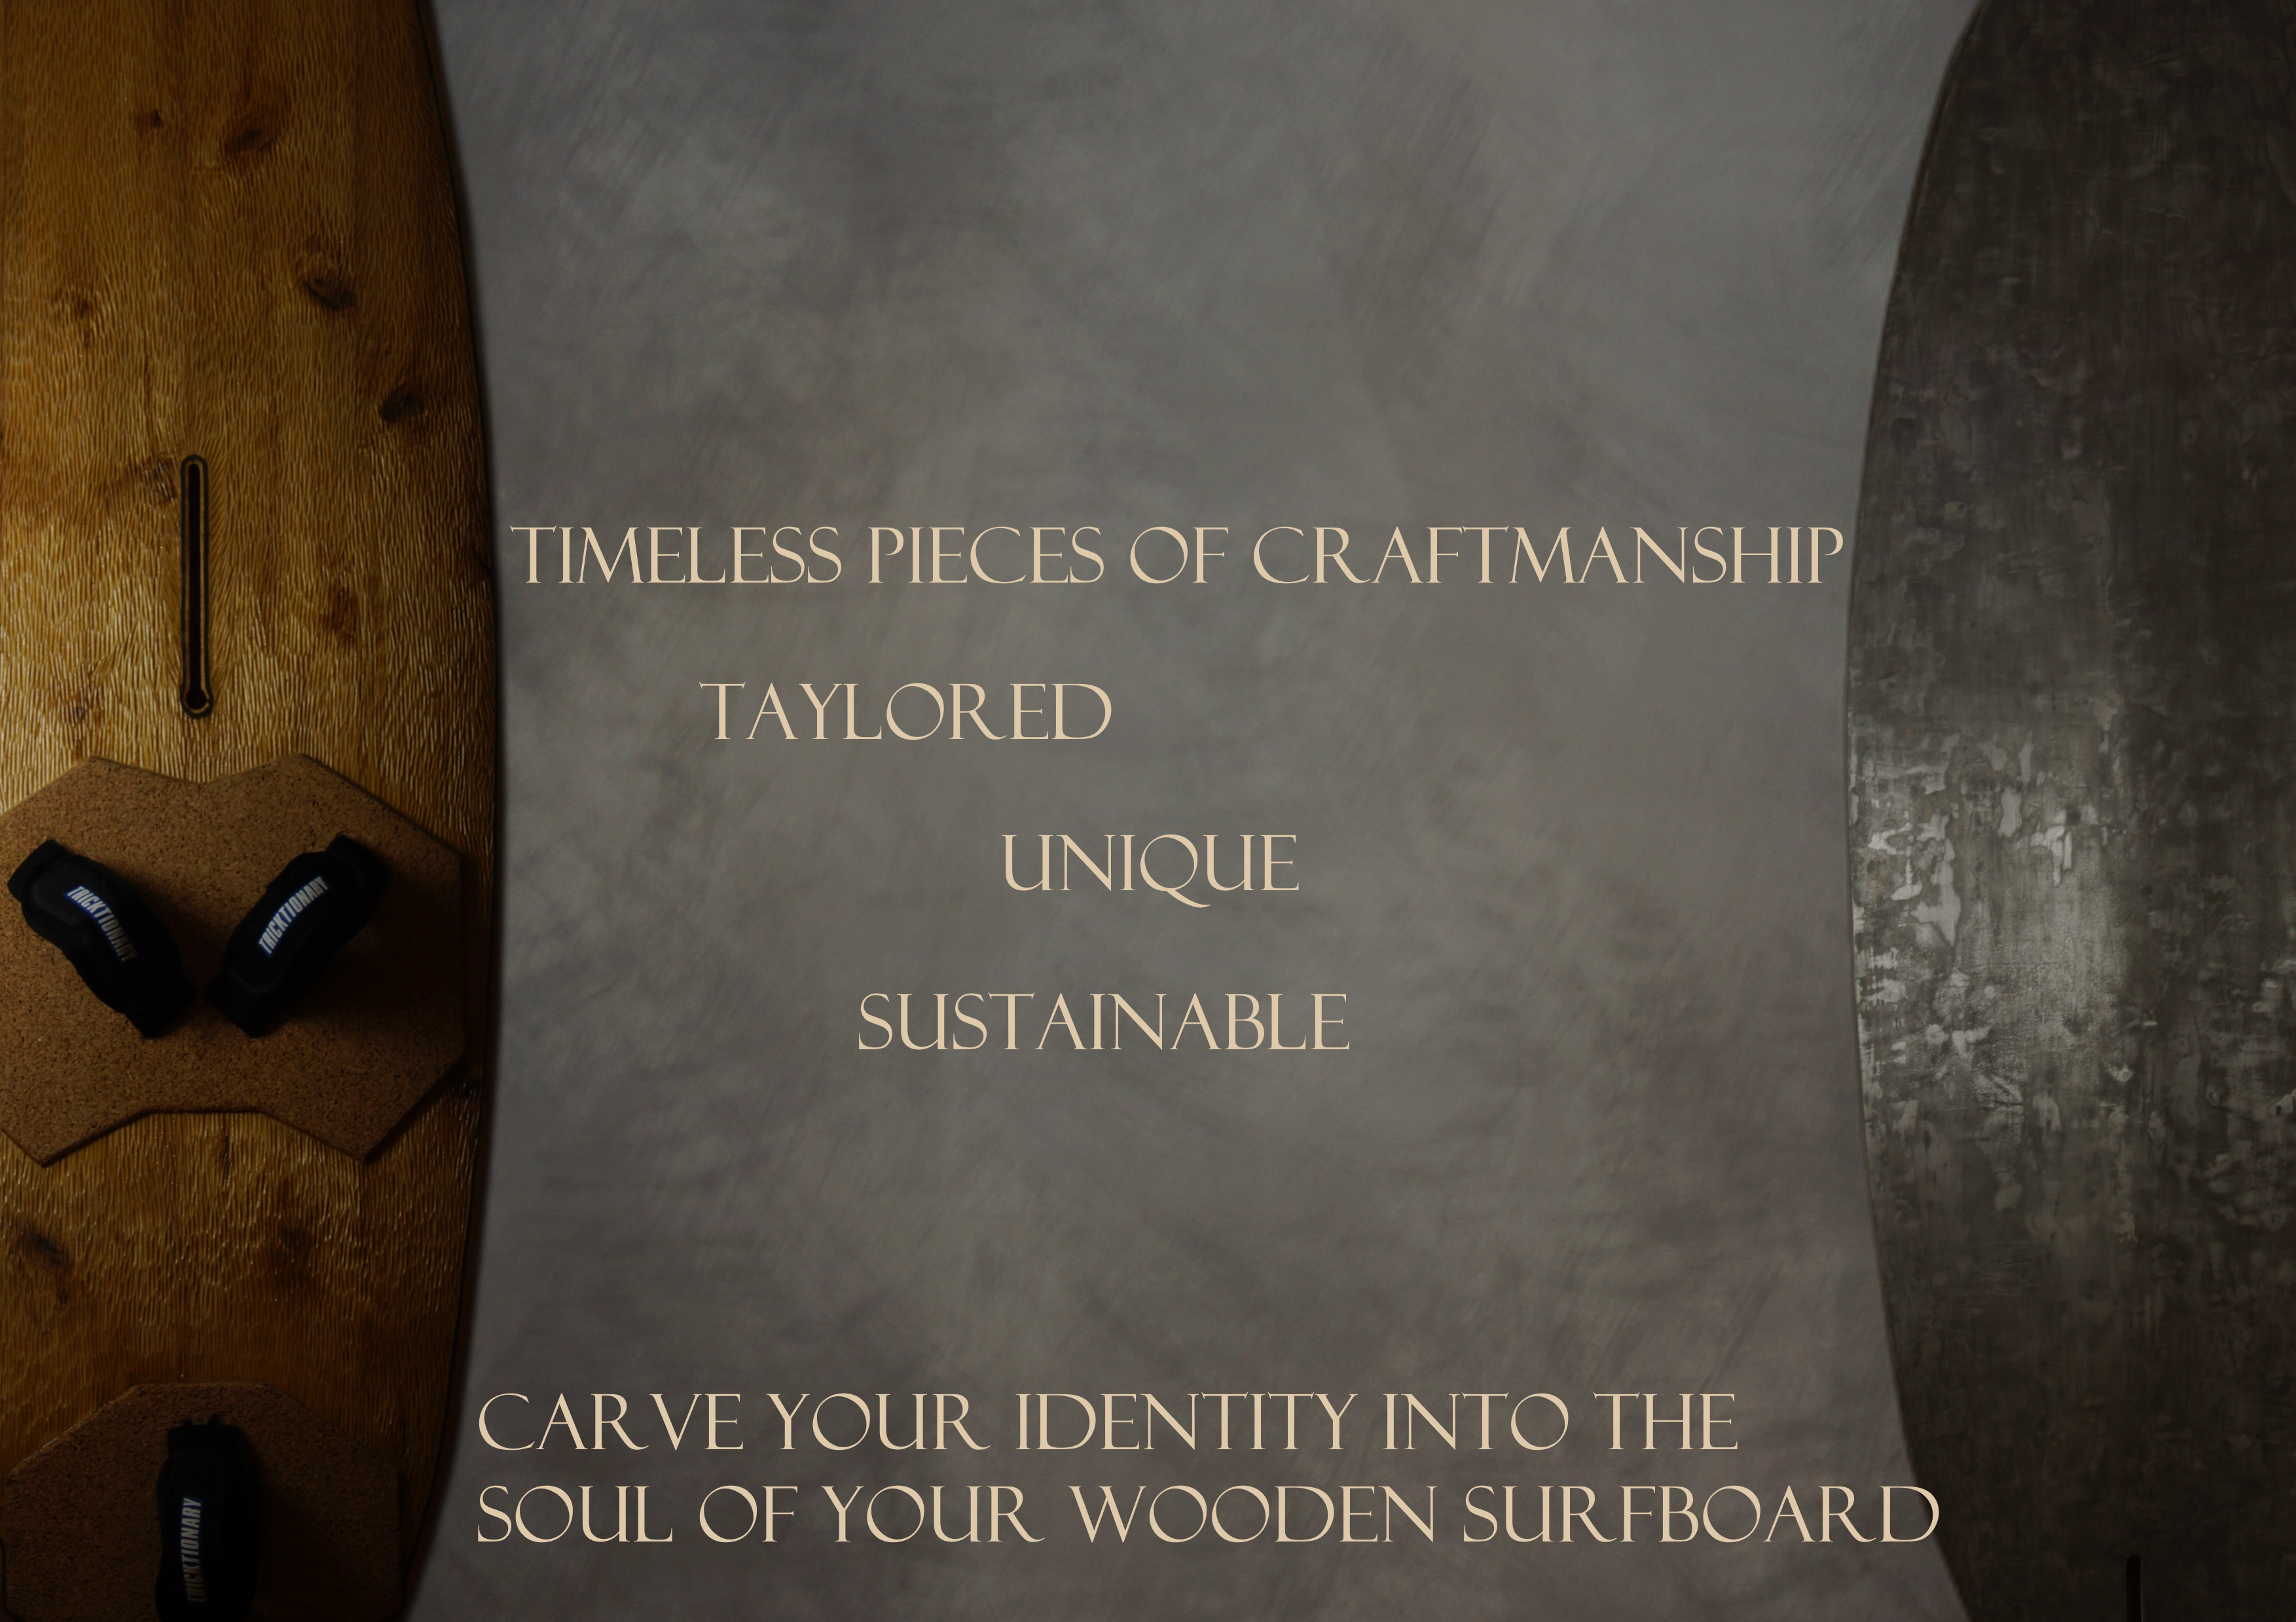 Carve your identity into the soul of your wooden surfboard